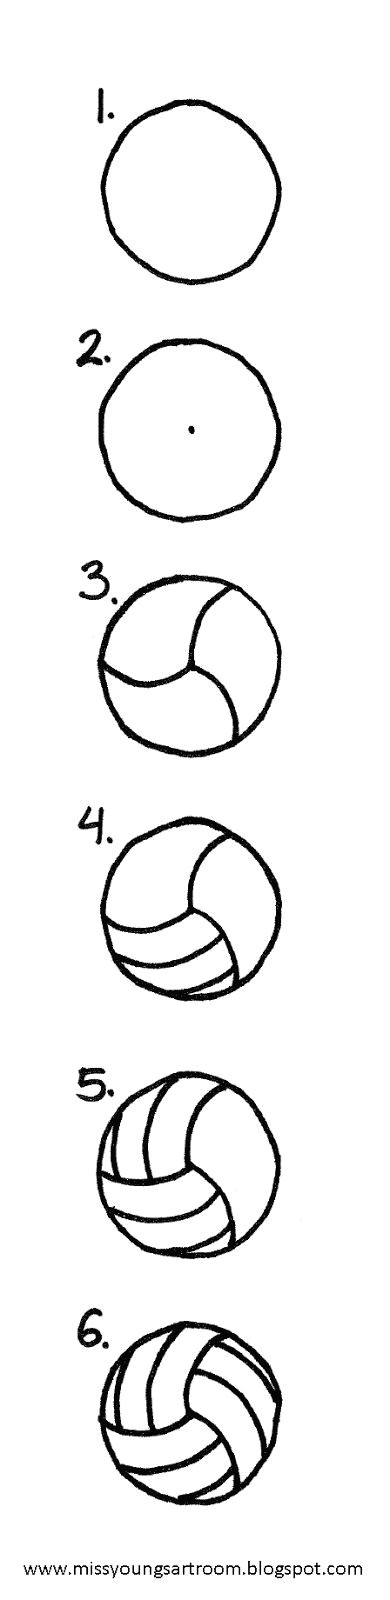 cool volleyball designs on shirts and other gift ideas by mudge volleyball design features welcome to the block party how to draw a volleyball